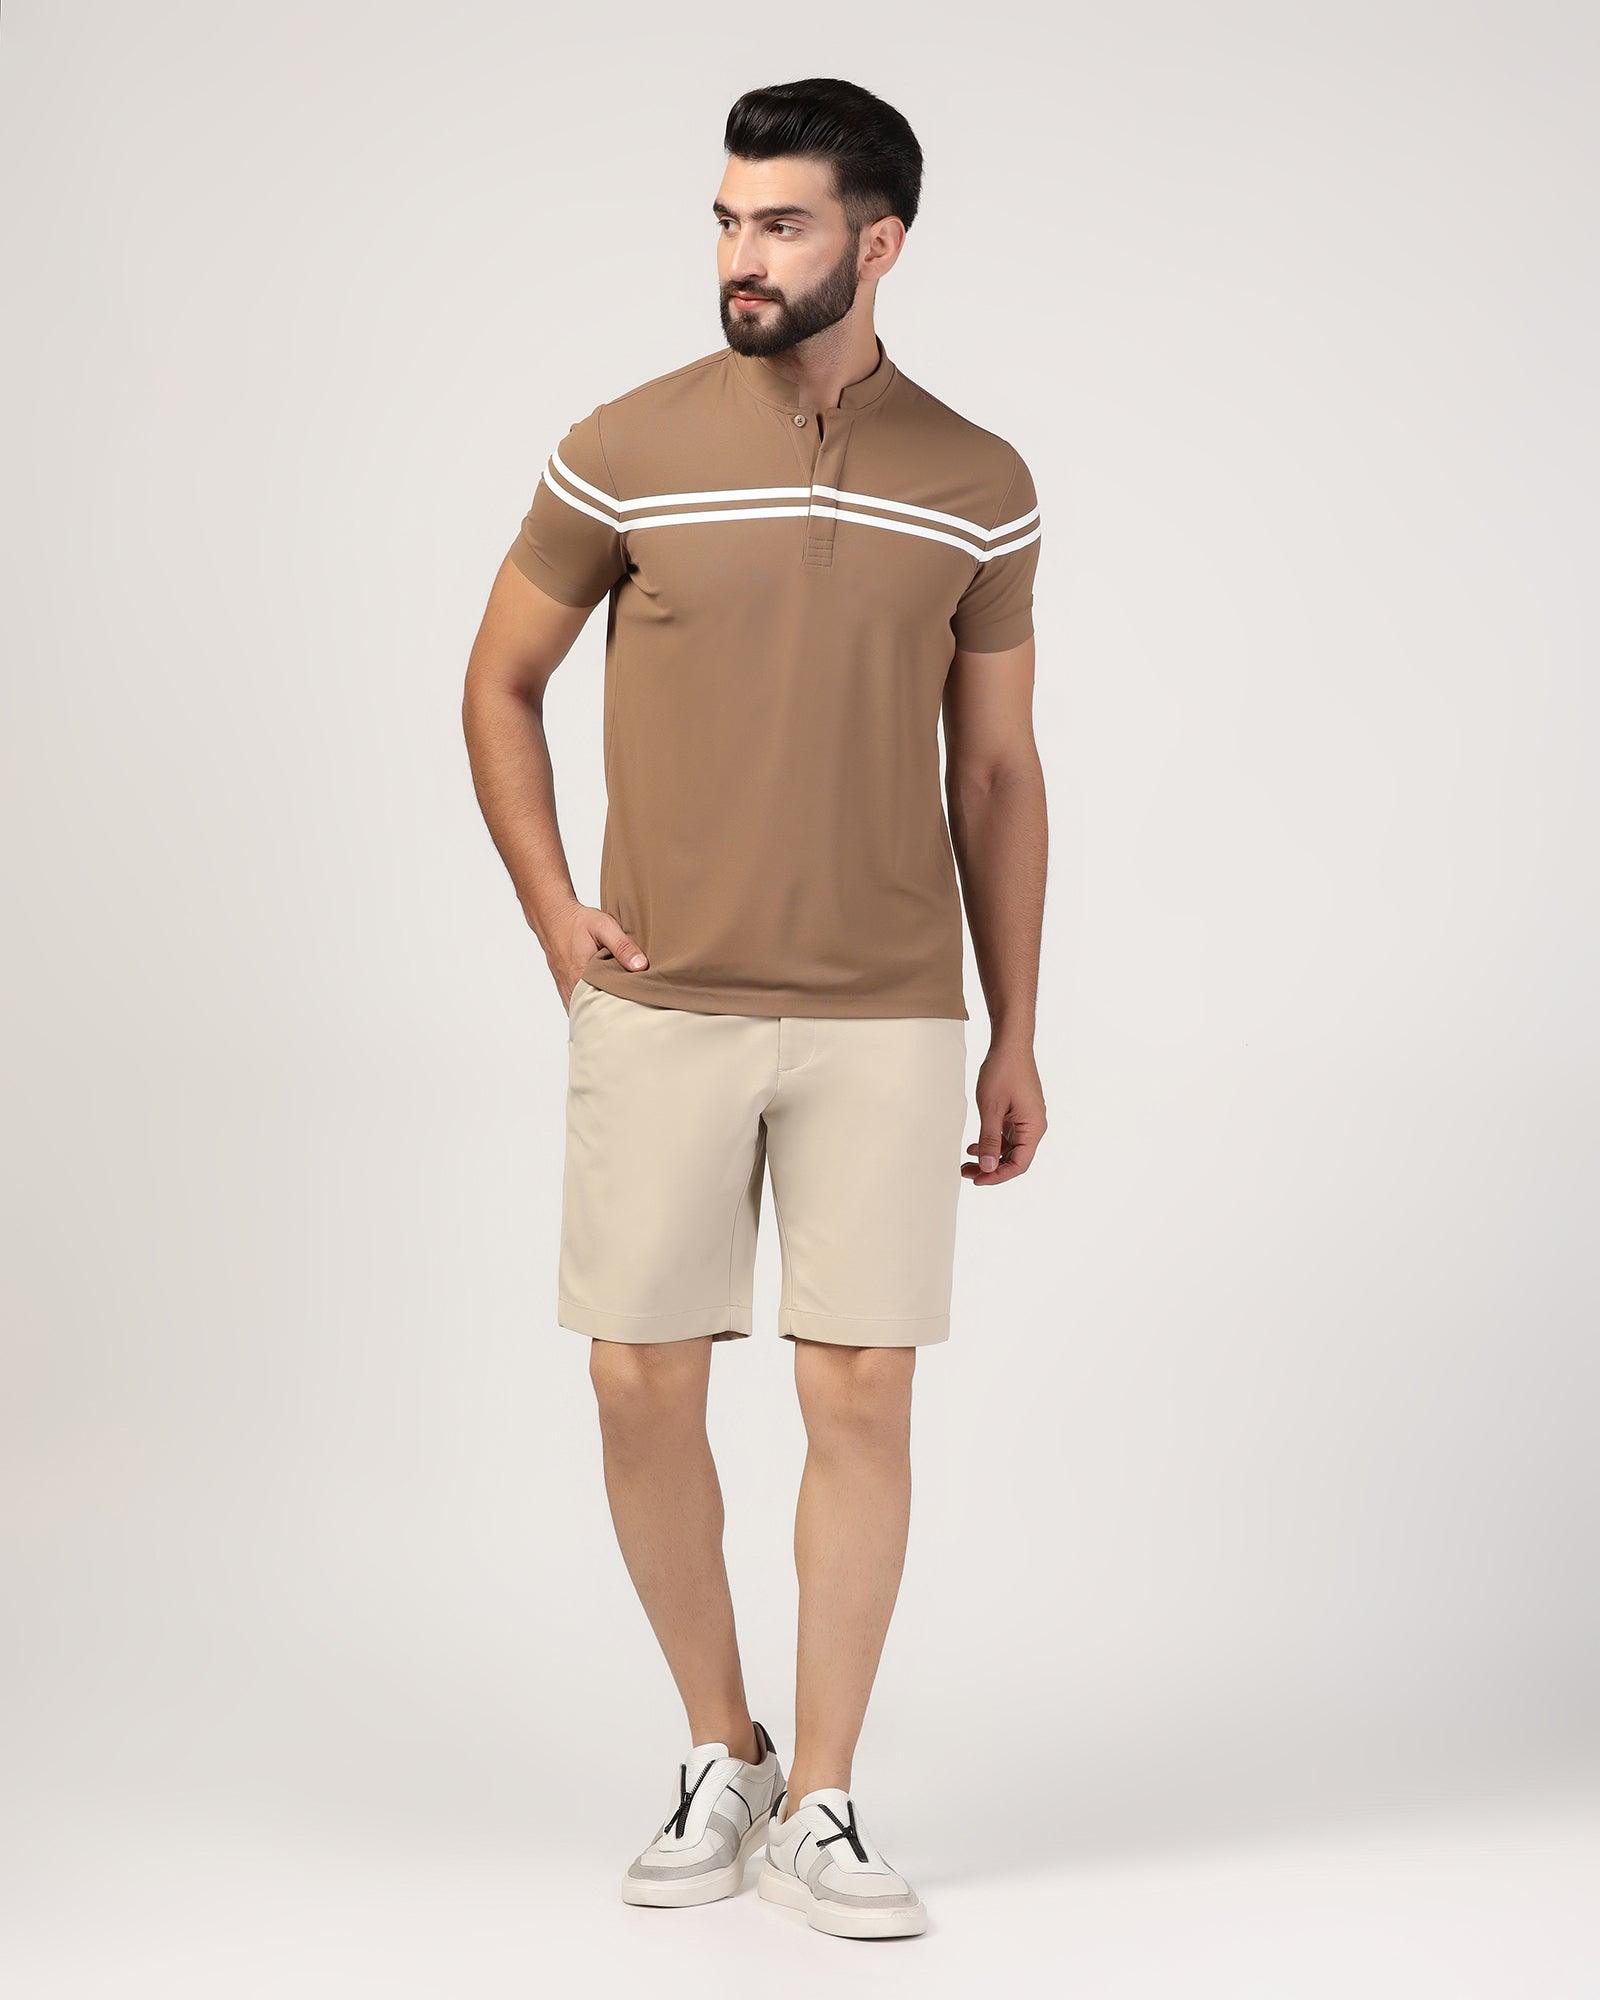 TechPro Casual Beige Solid Shorts - Serry